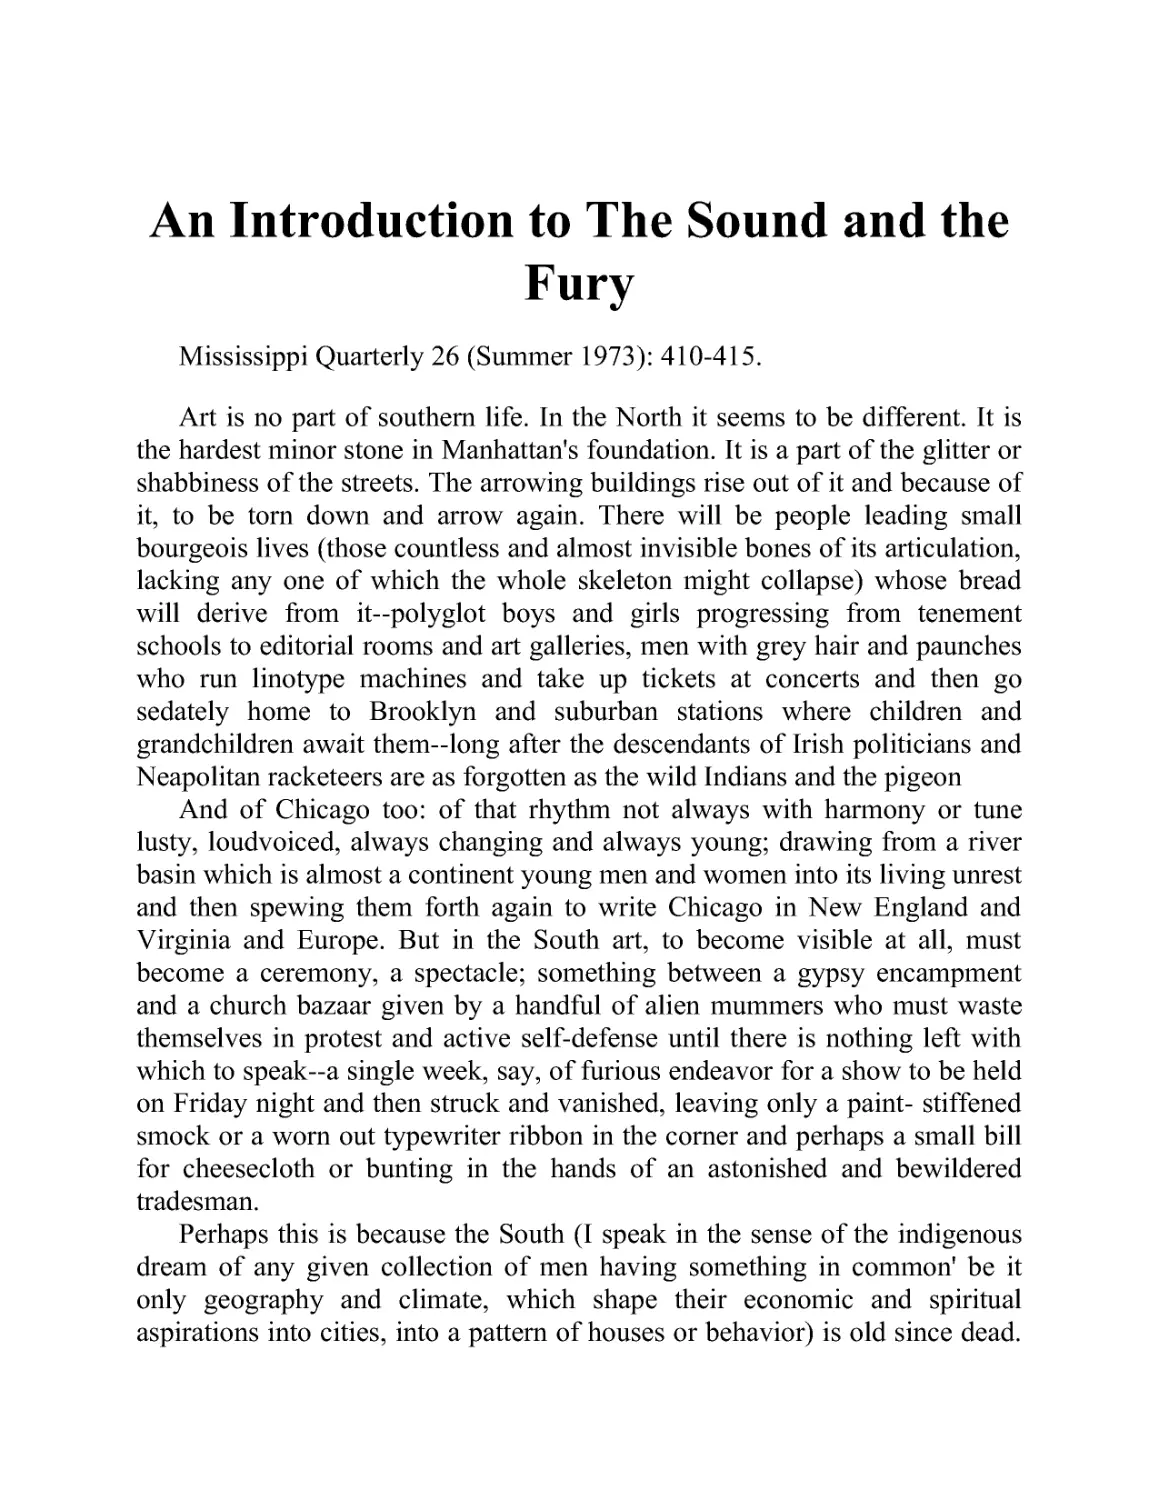 An Introduction to The Sound and the Fury